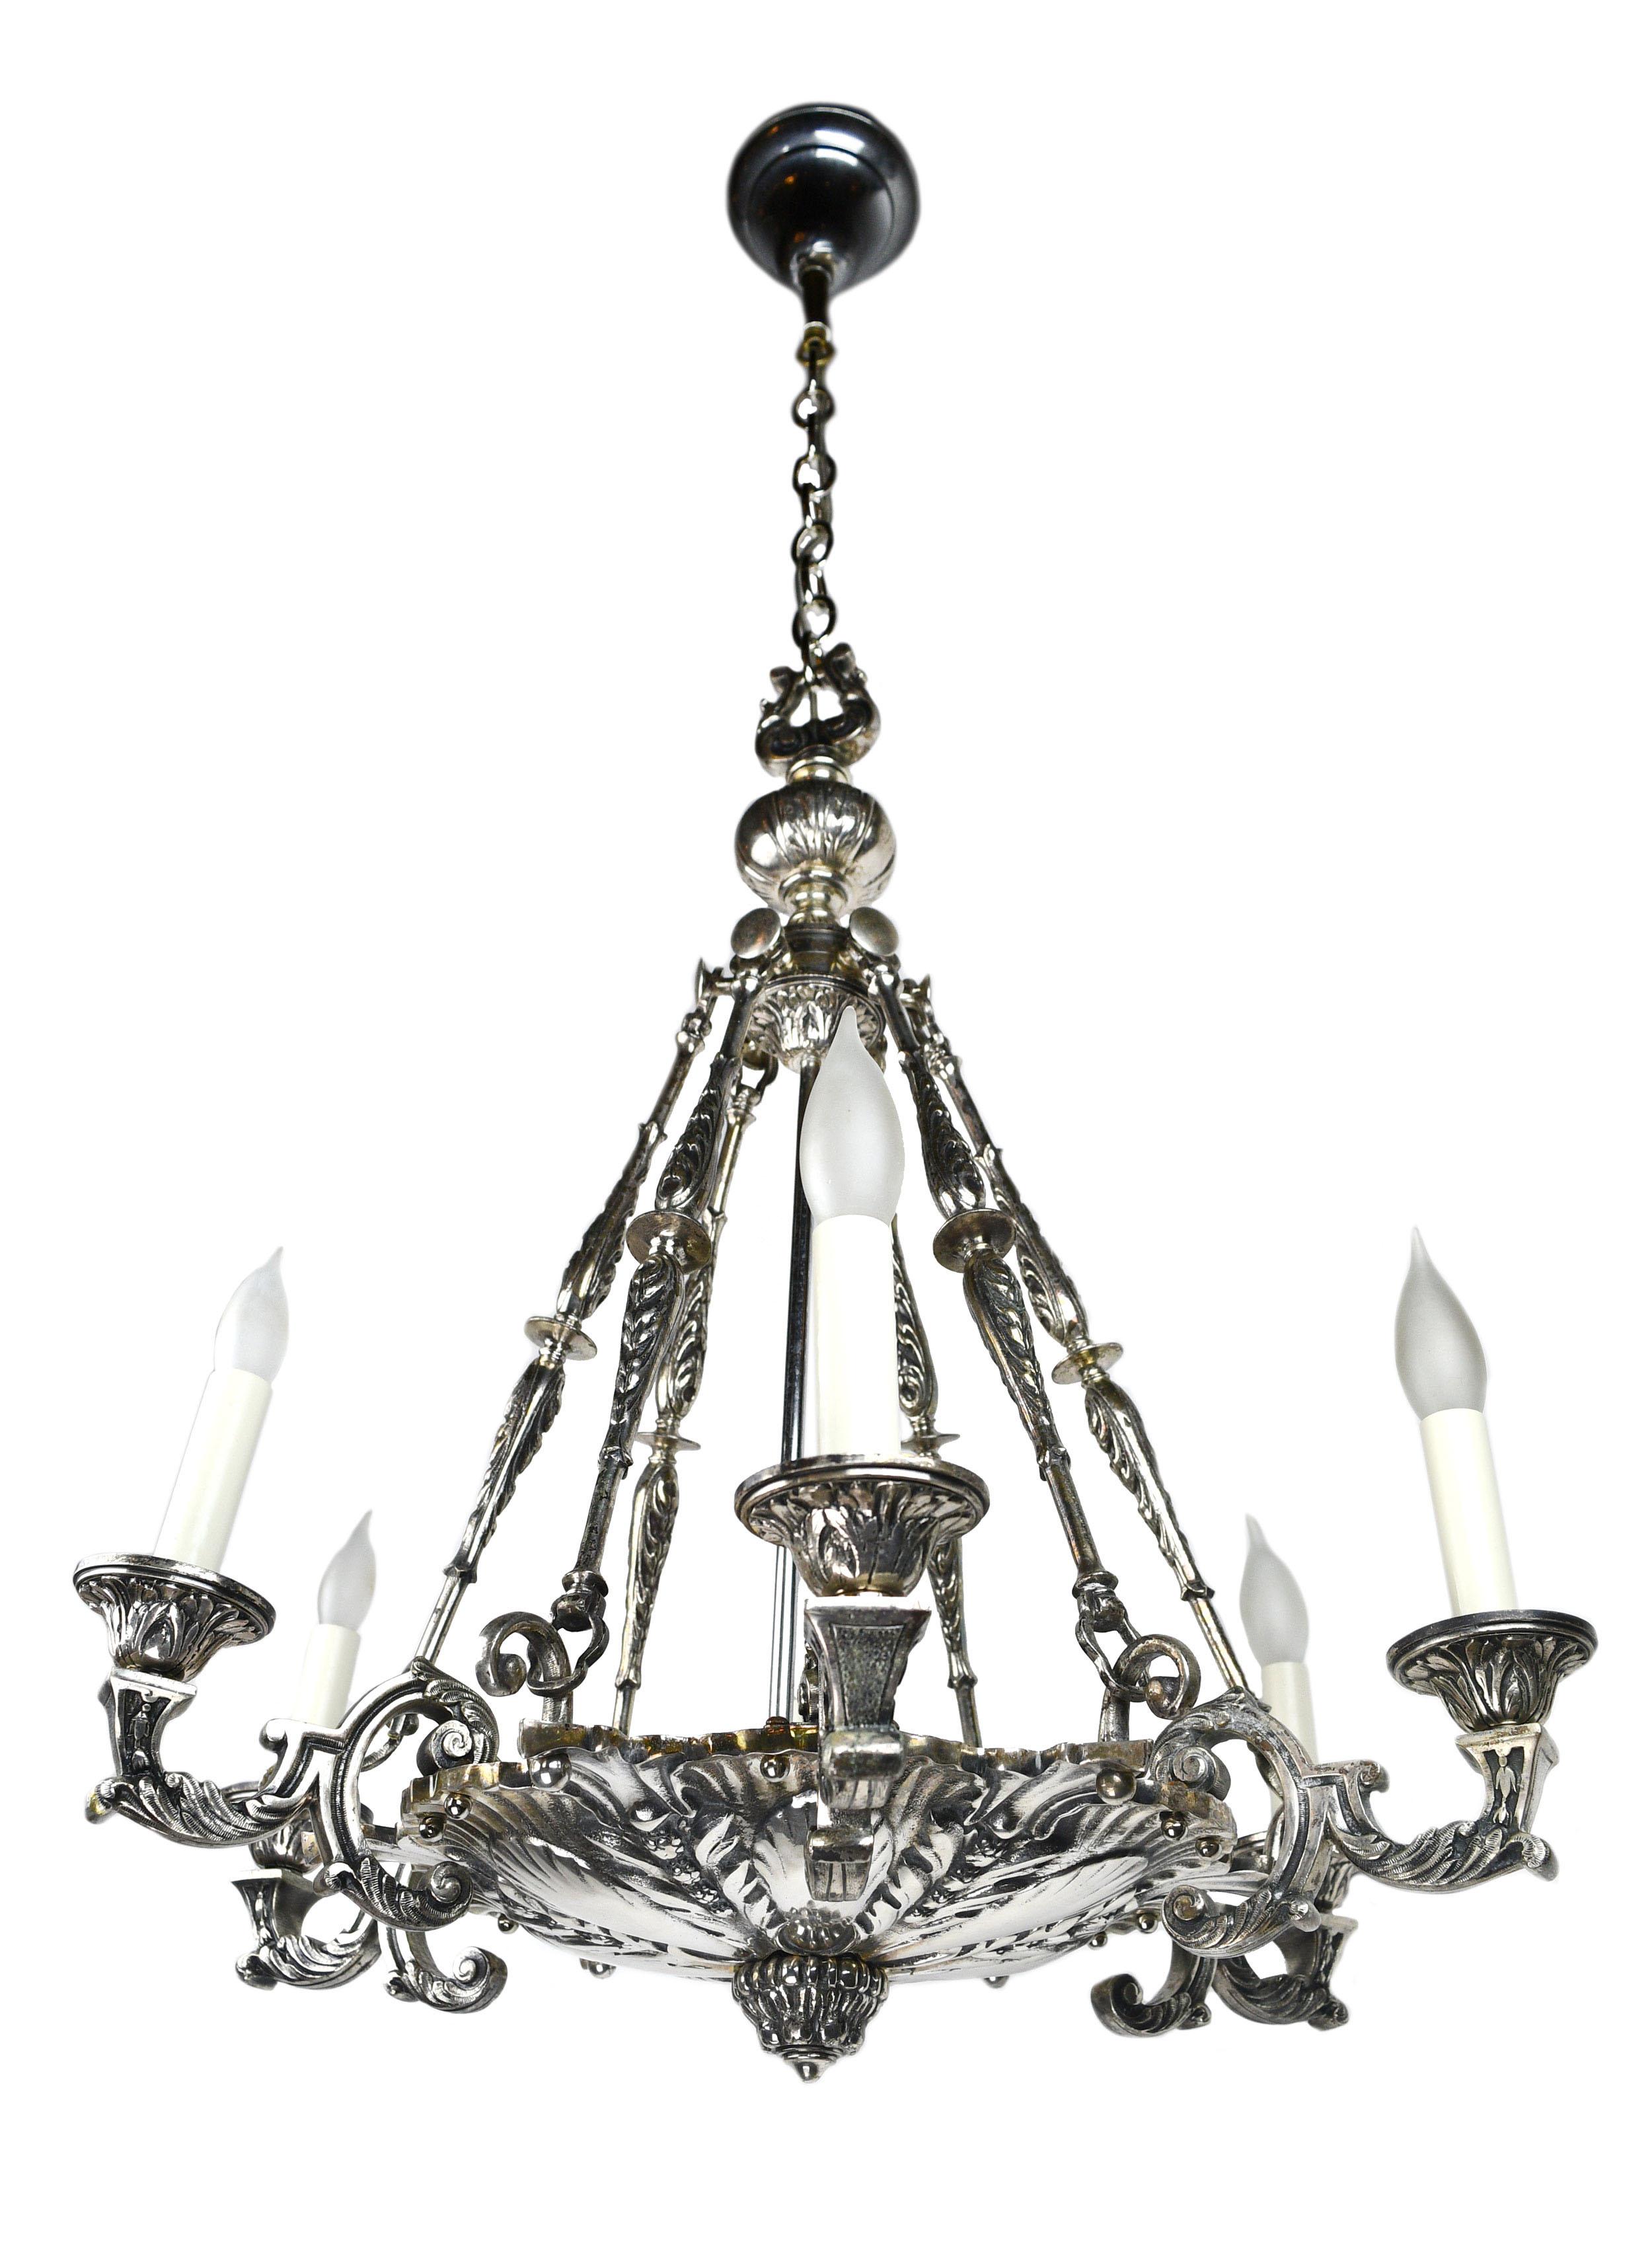 This stunning chandelier has lovely silver plating and features an intricately detailed floral pattern. The fine craftsmanship found through within the silver plating of this chandelier is truly eye-catching!